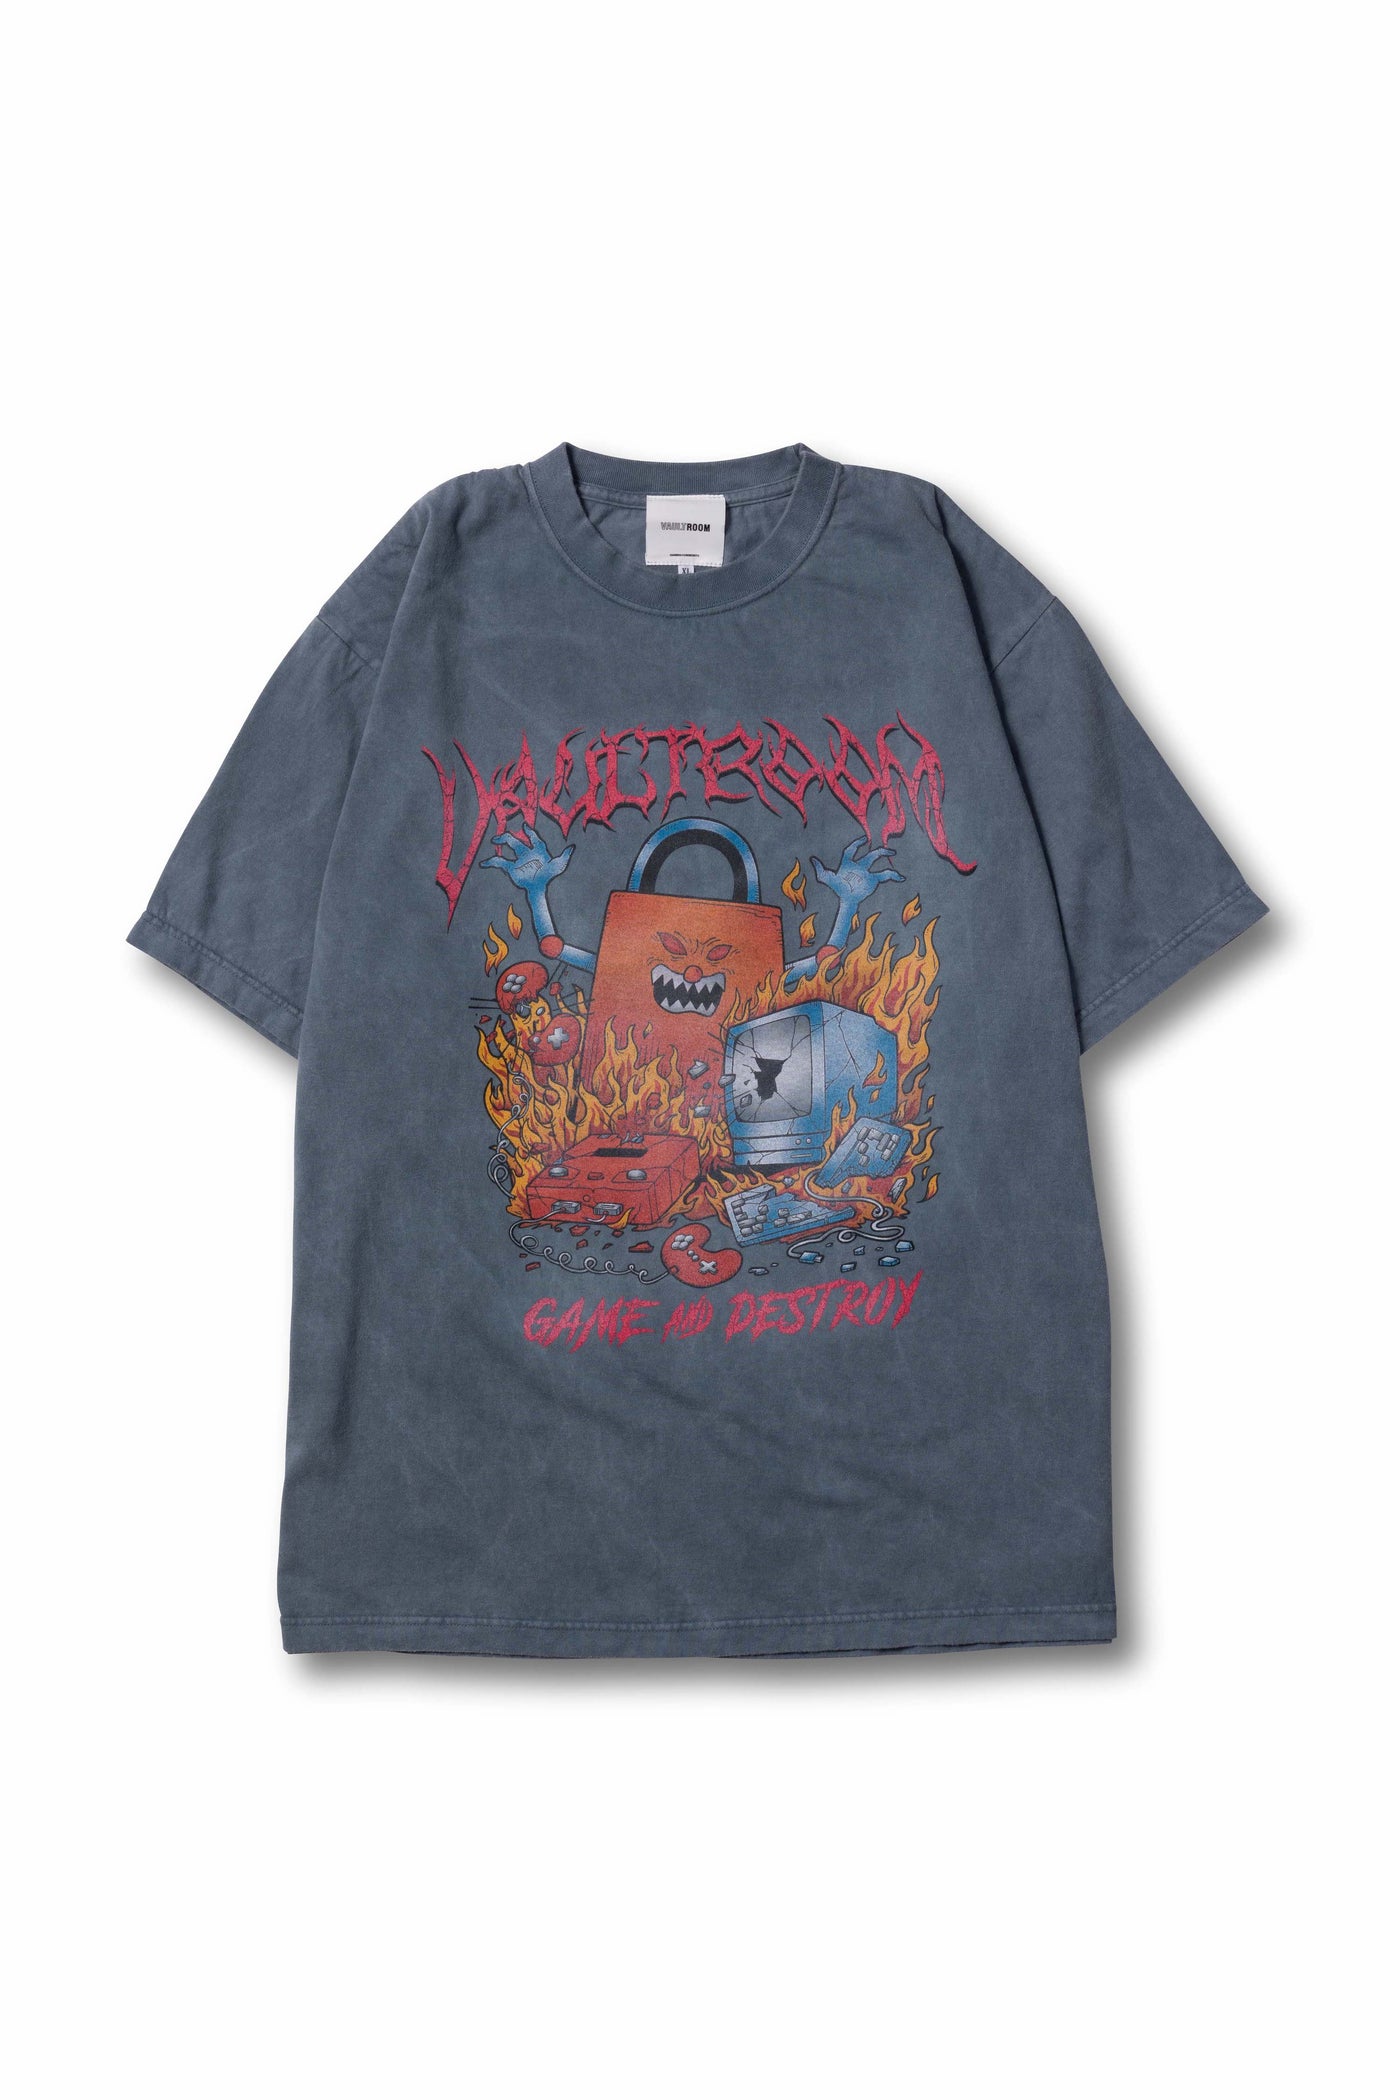 GAME AND DESTROY TEE / BLUE GRAY